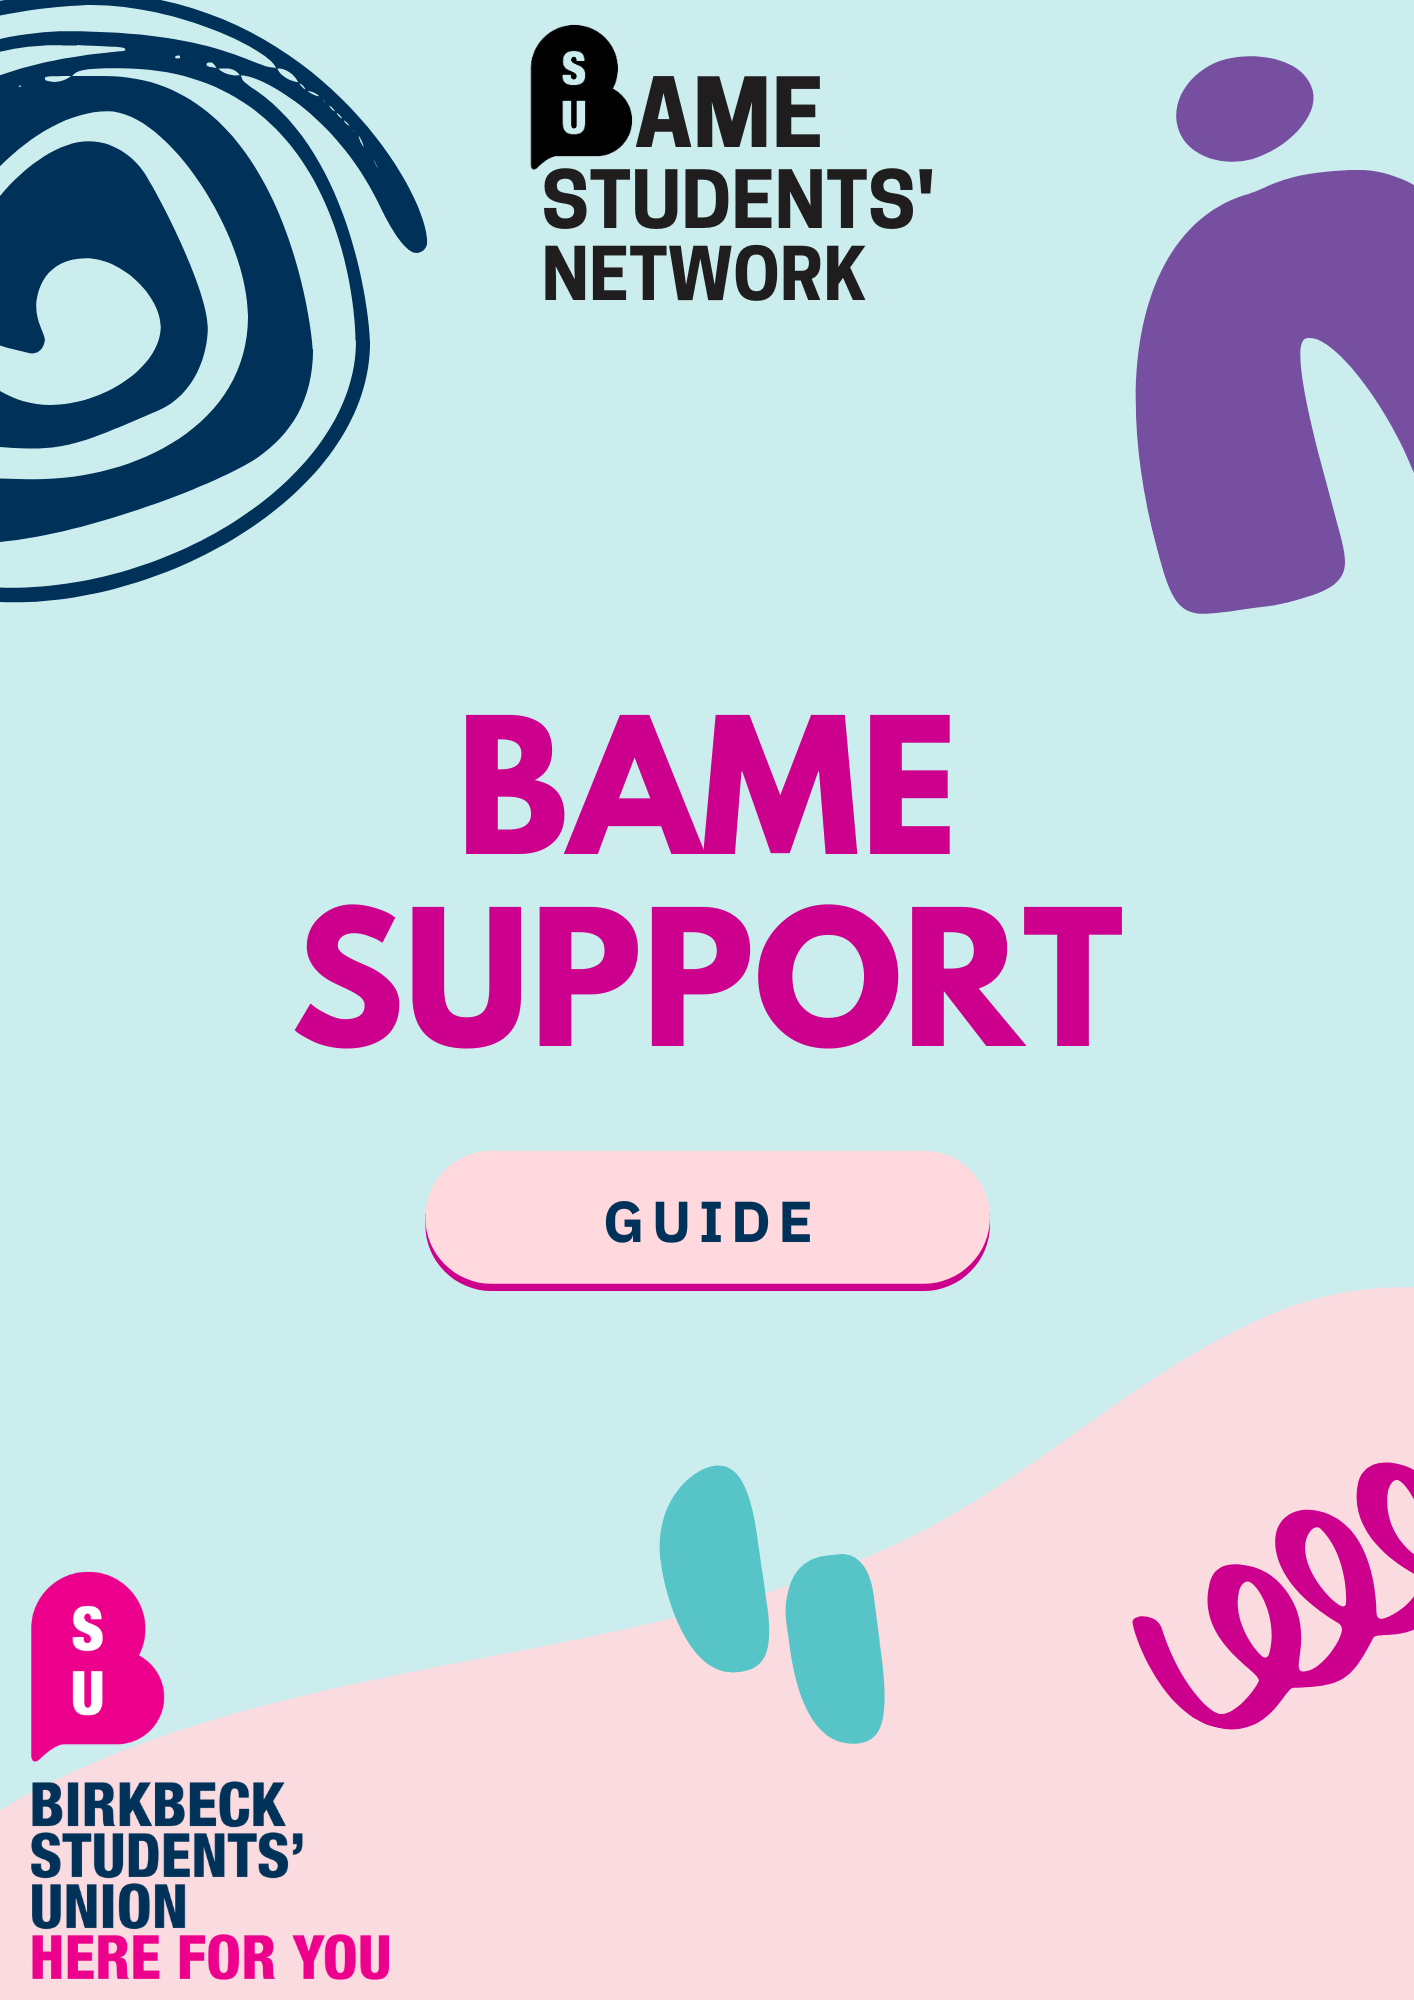 Poster promoting the BAME Students' Network with the text "BAME SUPPORT GUIDE" in large pink letters on a light blue background with abstract designs and the Birkbeck Students' Union logo and motto "HERE FOR YOU".